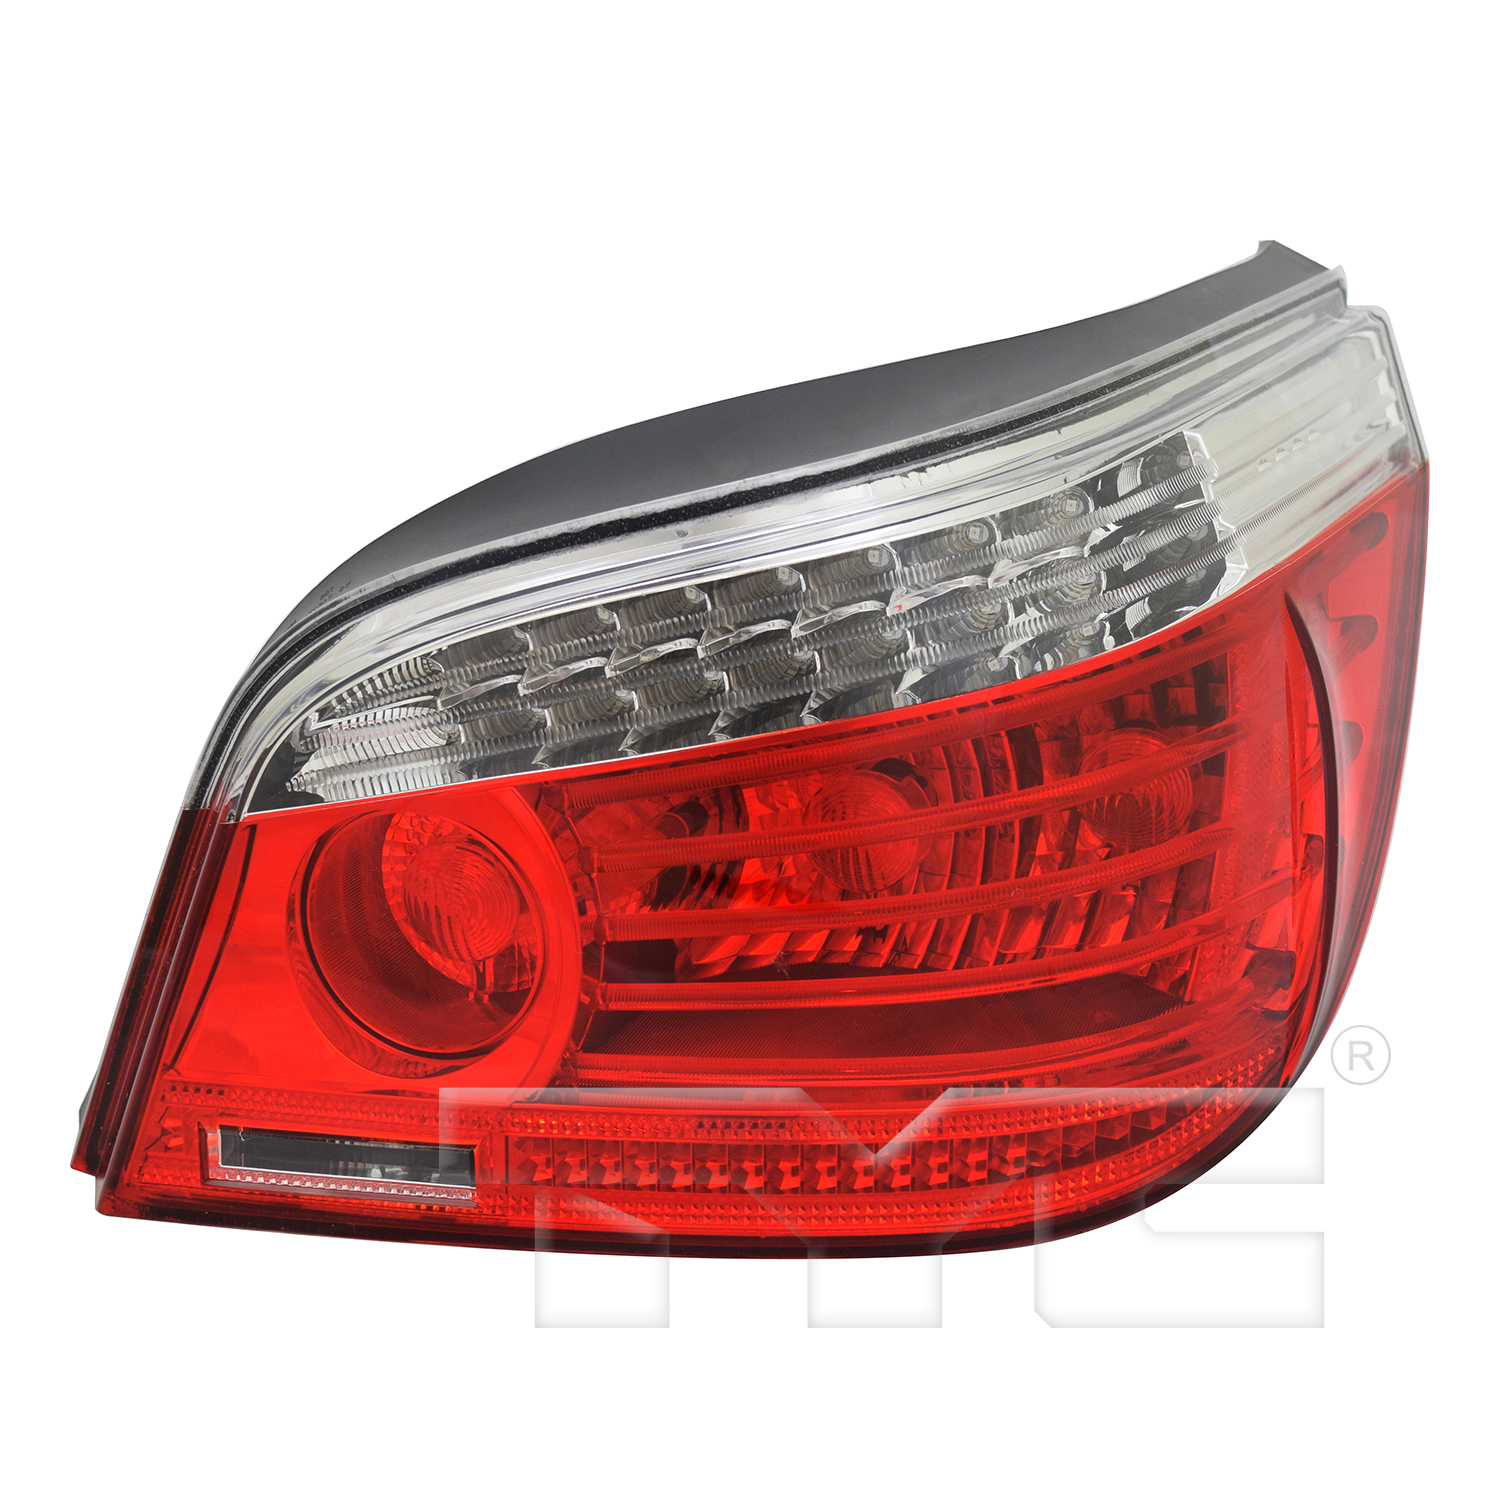 Aftermarket TAILLIGHTS for BMW - 550I, 550i,08-10,RT Taillamp assy